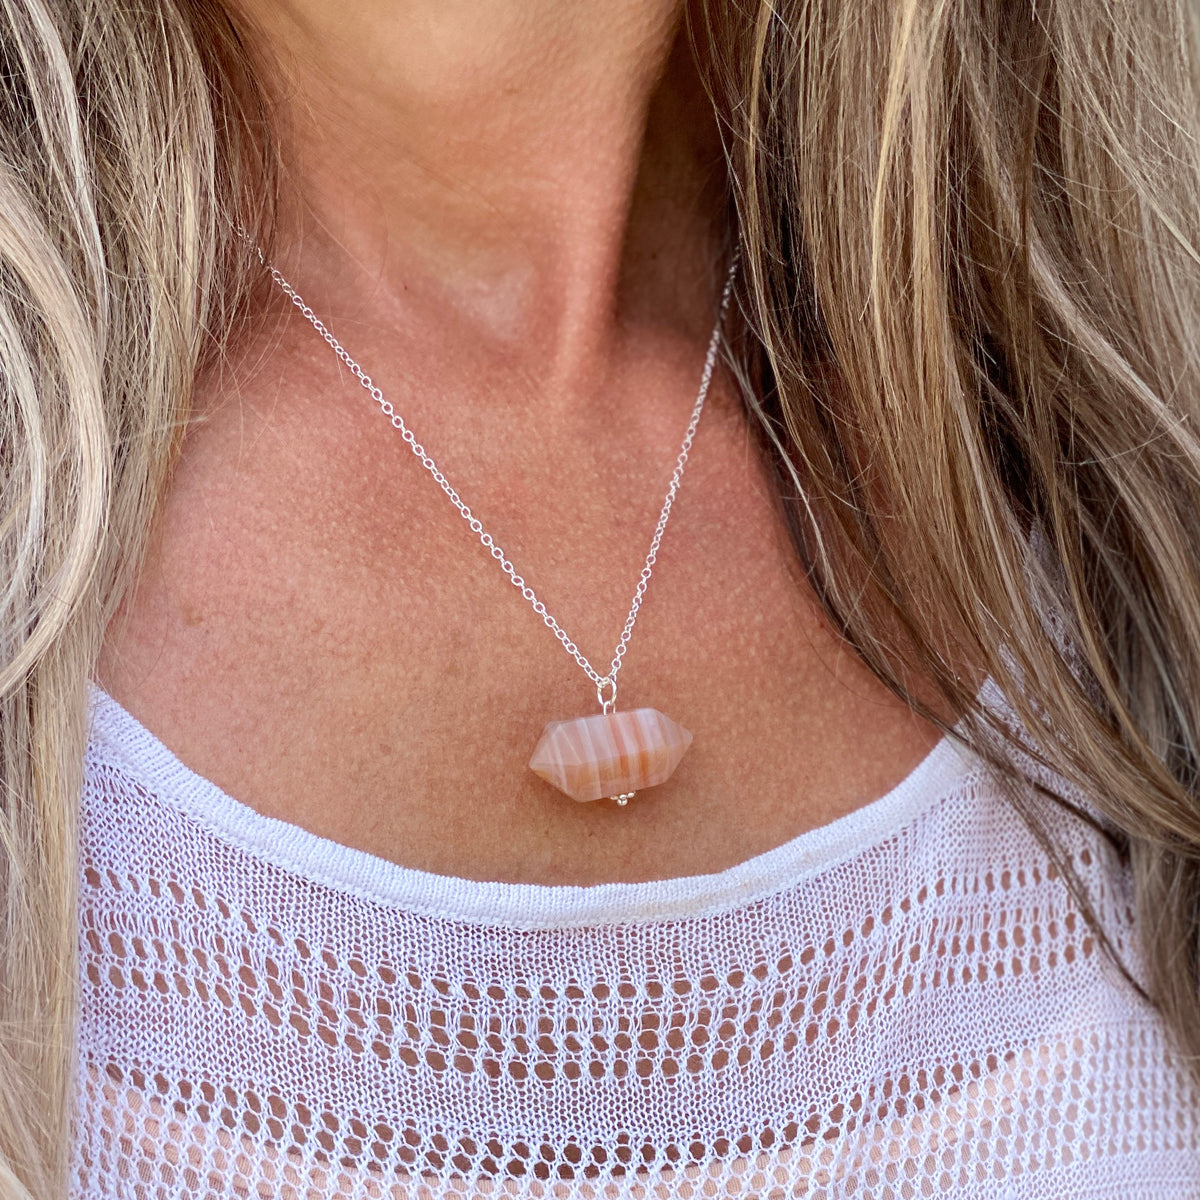 Agate Crystal Necklace for Protection Best crystals for protection Agate is the stone for Protection. Agate is THE stone everyone should have for protection. Agate is believed to enhance intelligence, and make its wearer more articulate. 